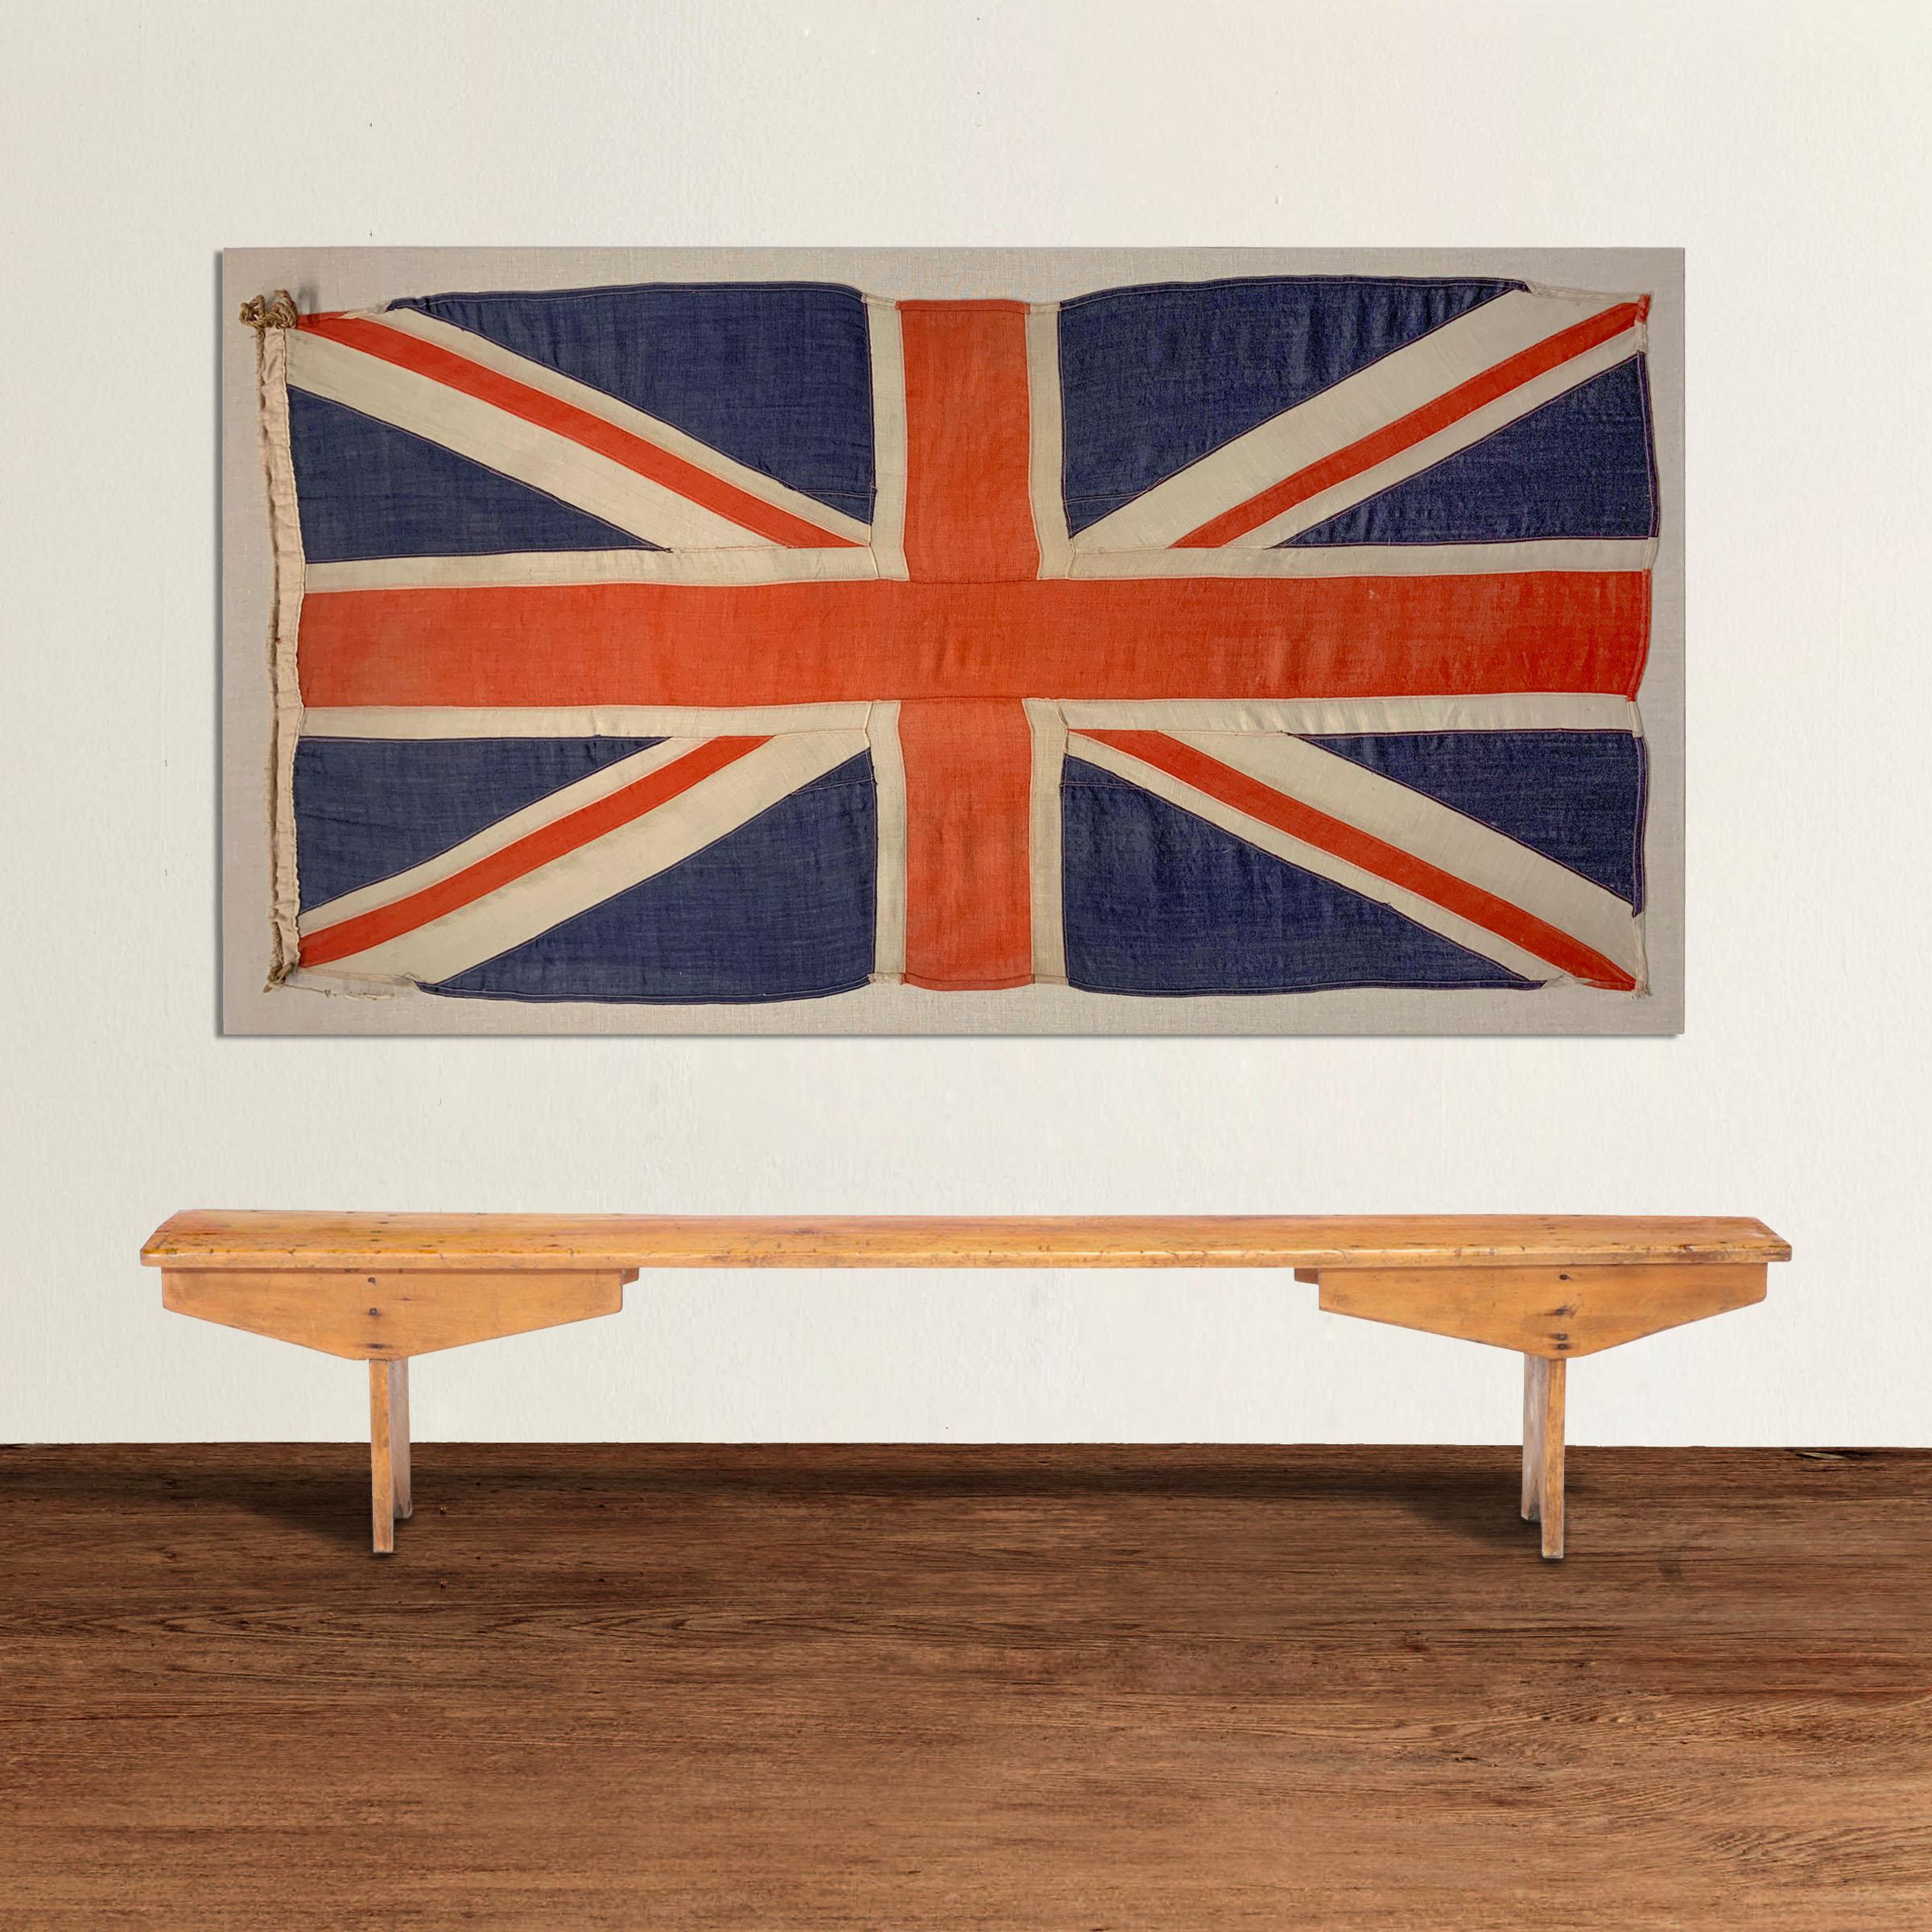 A large and loyal vintage British nautical Union Jack flag, woven of red, white, and blue linen, and handstitched onto a Belgian linen stretchers. Can hang vertically or horizontally.